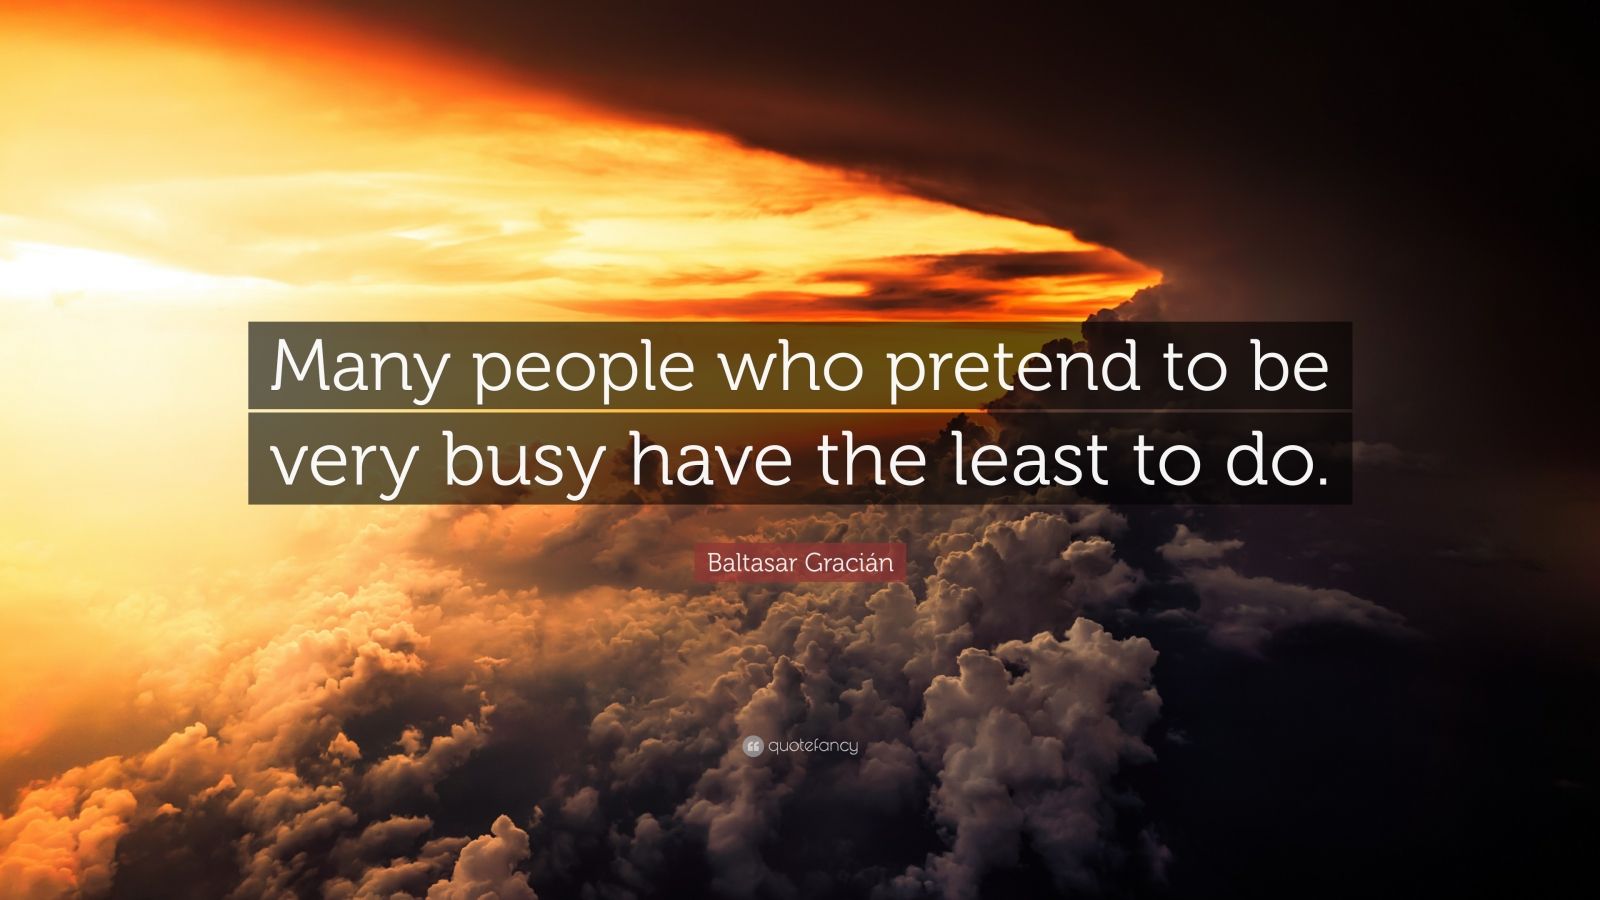 Baltasar Gracián Quote: “Many people who pretend to be very busy have the least to do.”